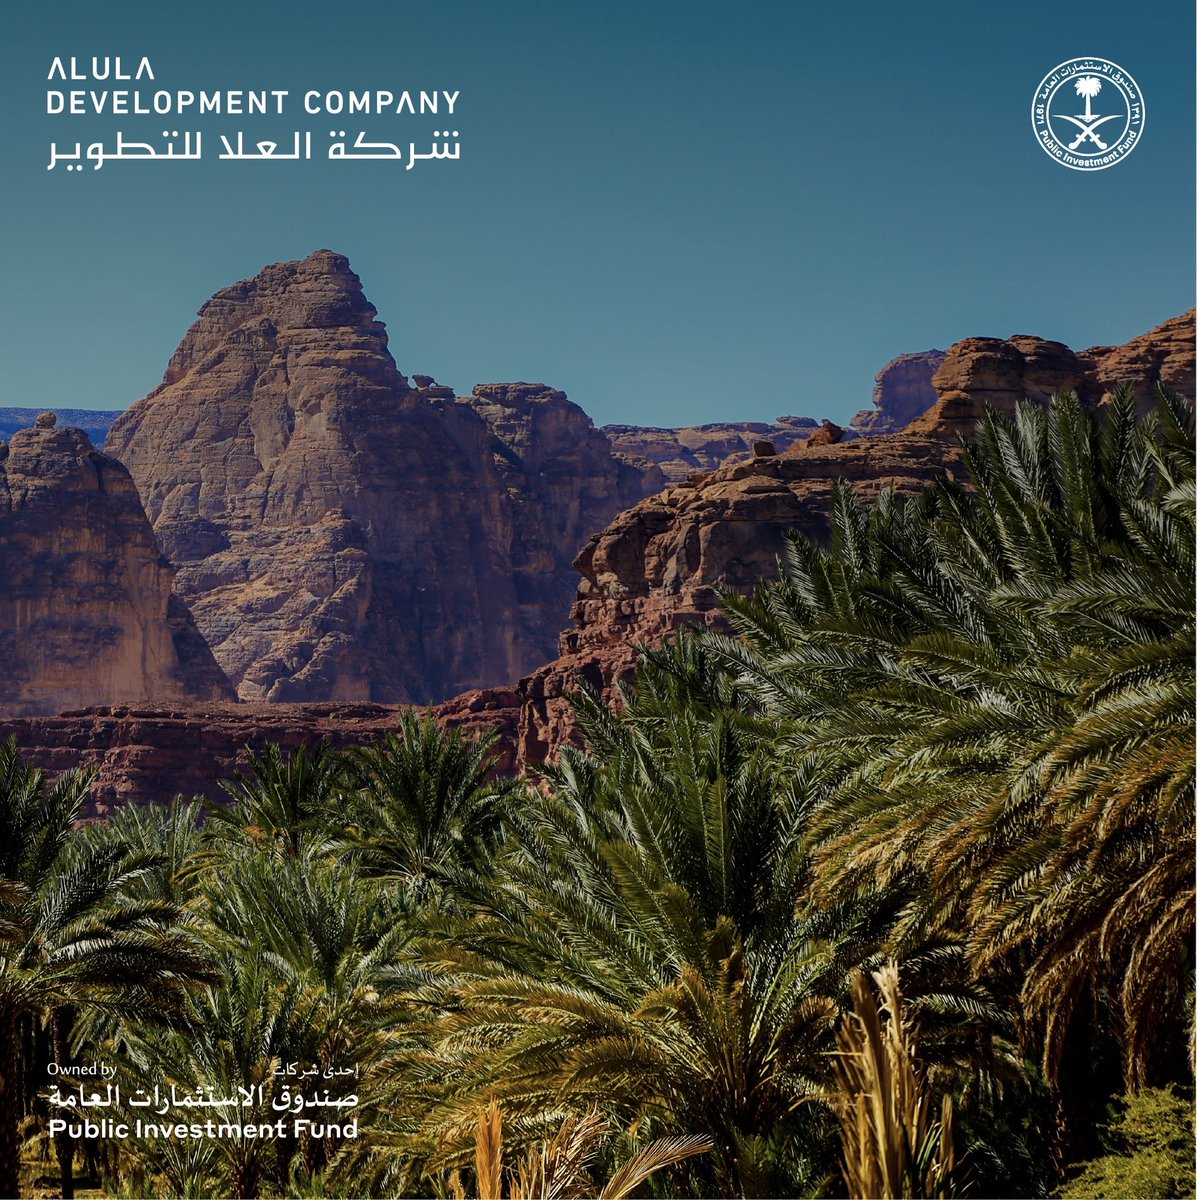 Set in the Saudi Arabian desert, the #AlUlaOasis is a lush haven that has made the region a cultural crossroads and has provided life to AlUla’s residents, travelers, and flora and fauna for thousands of years.

#UDC